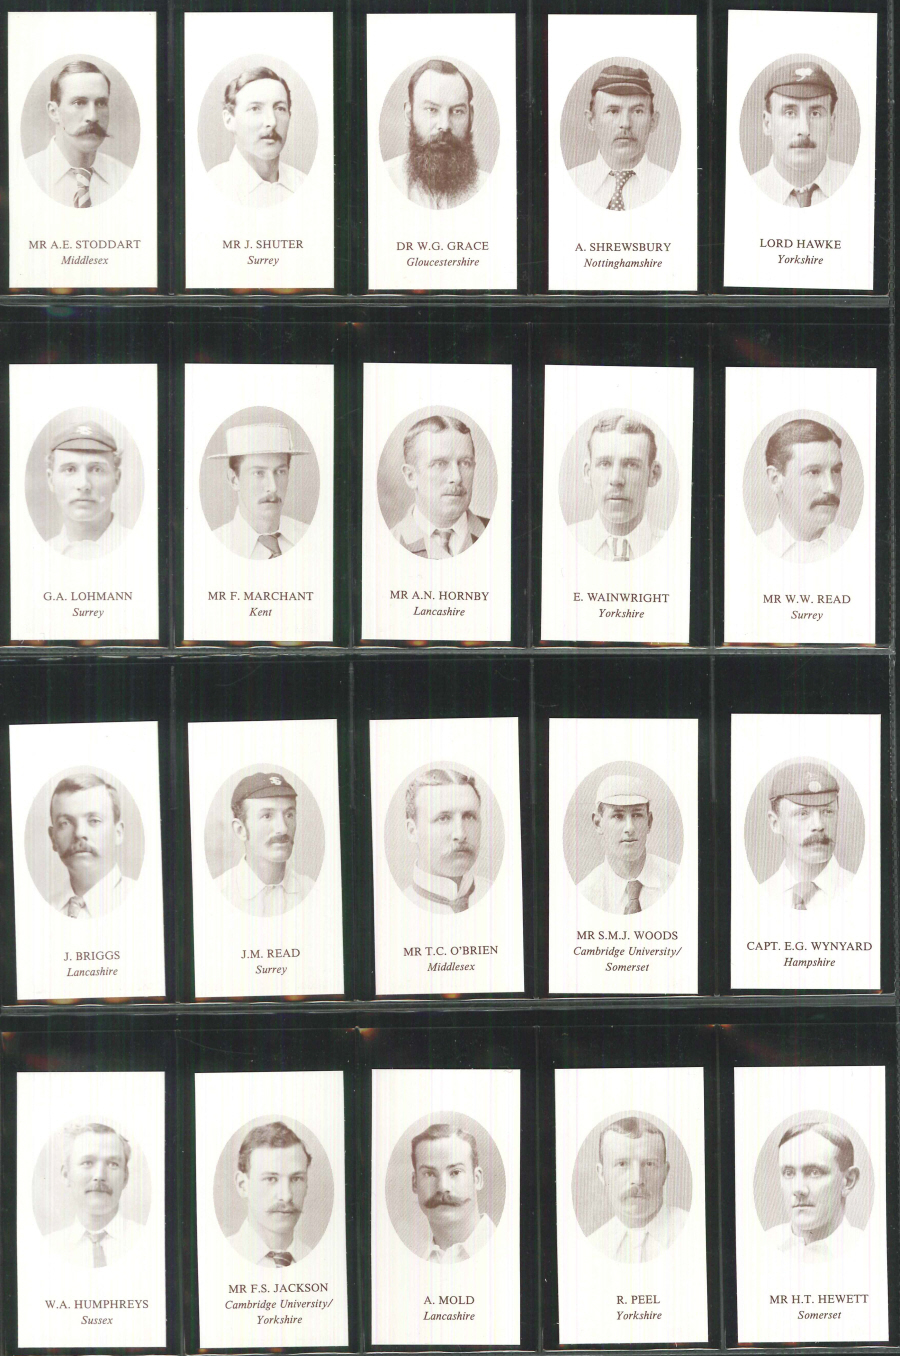 County Print - Cricketerers of 1890 - Set of 50